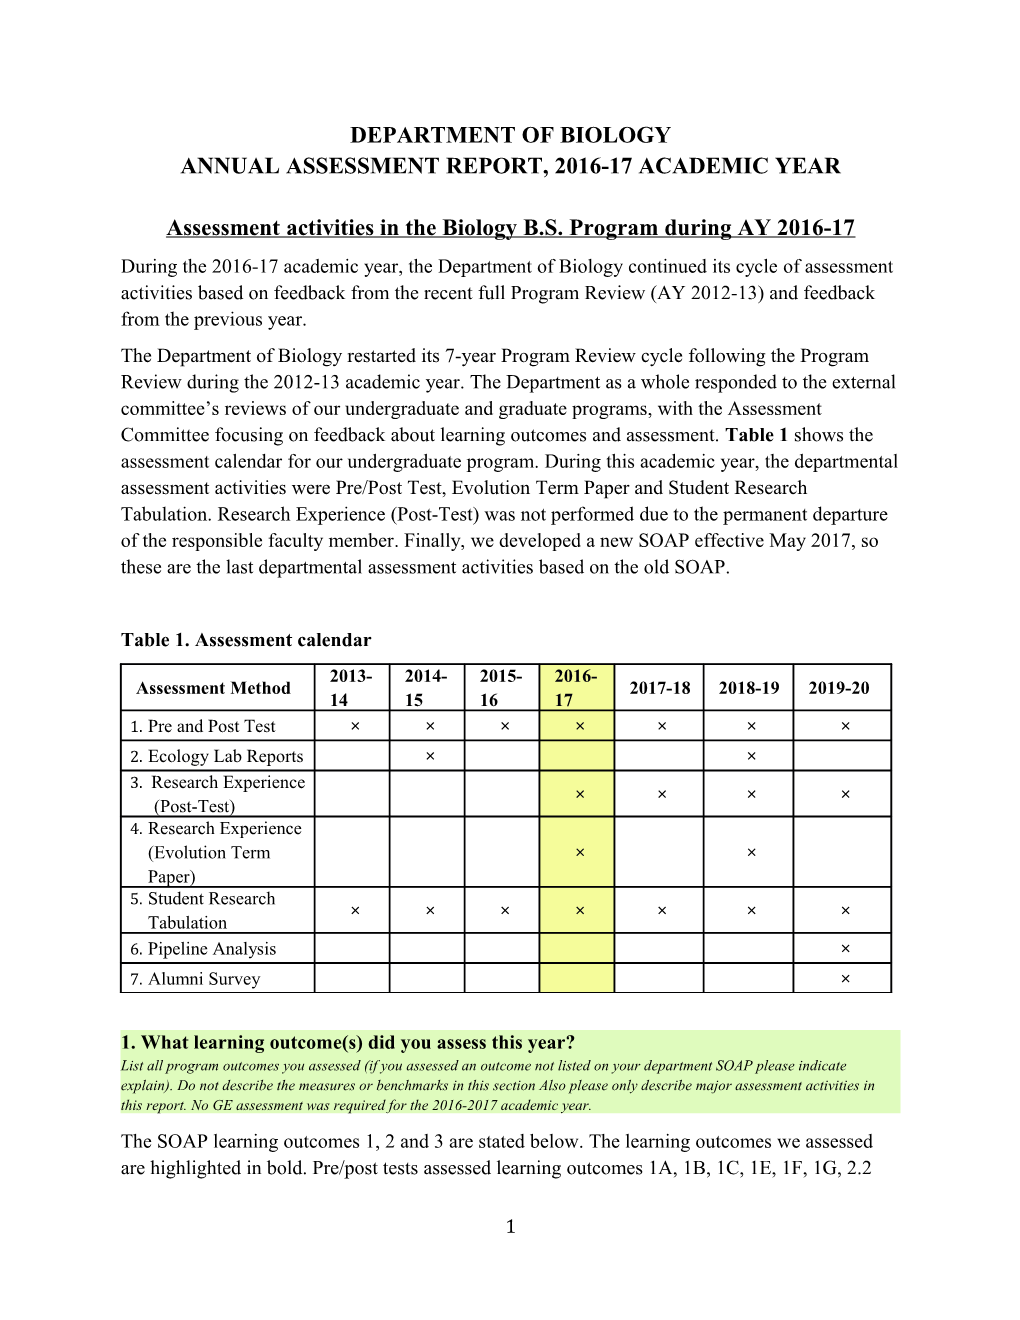 Annual Assessment Report, 2016-17 Academic Year